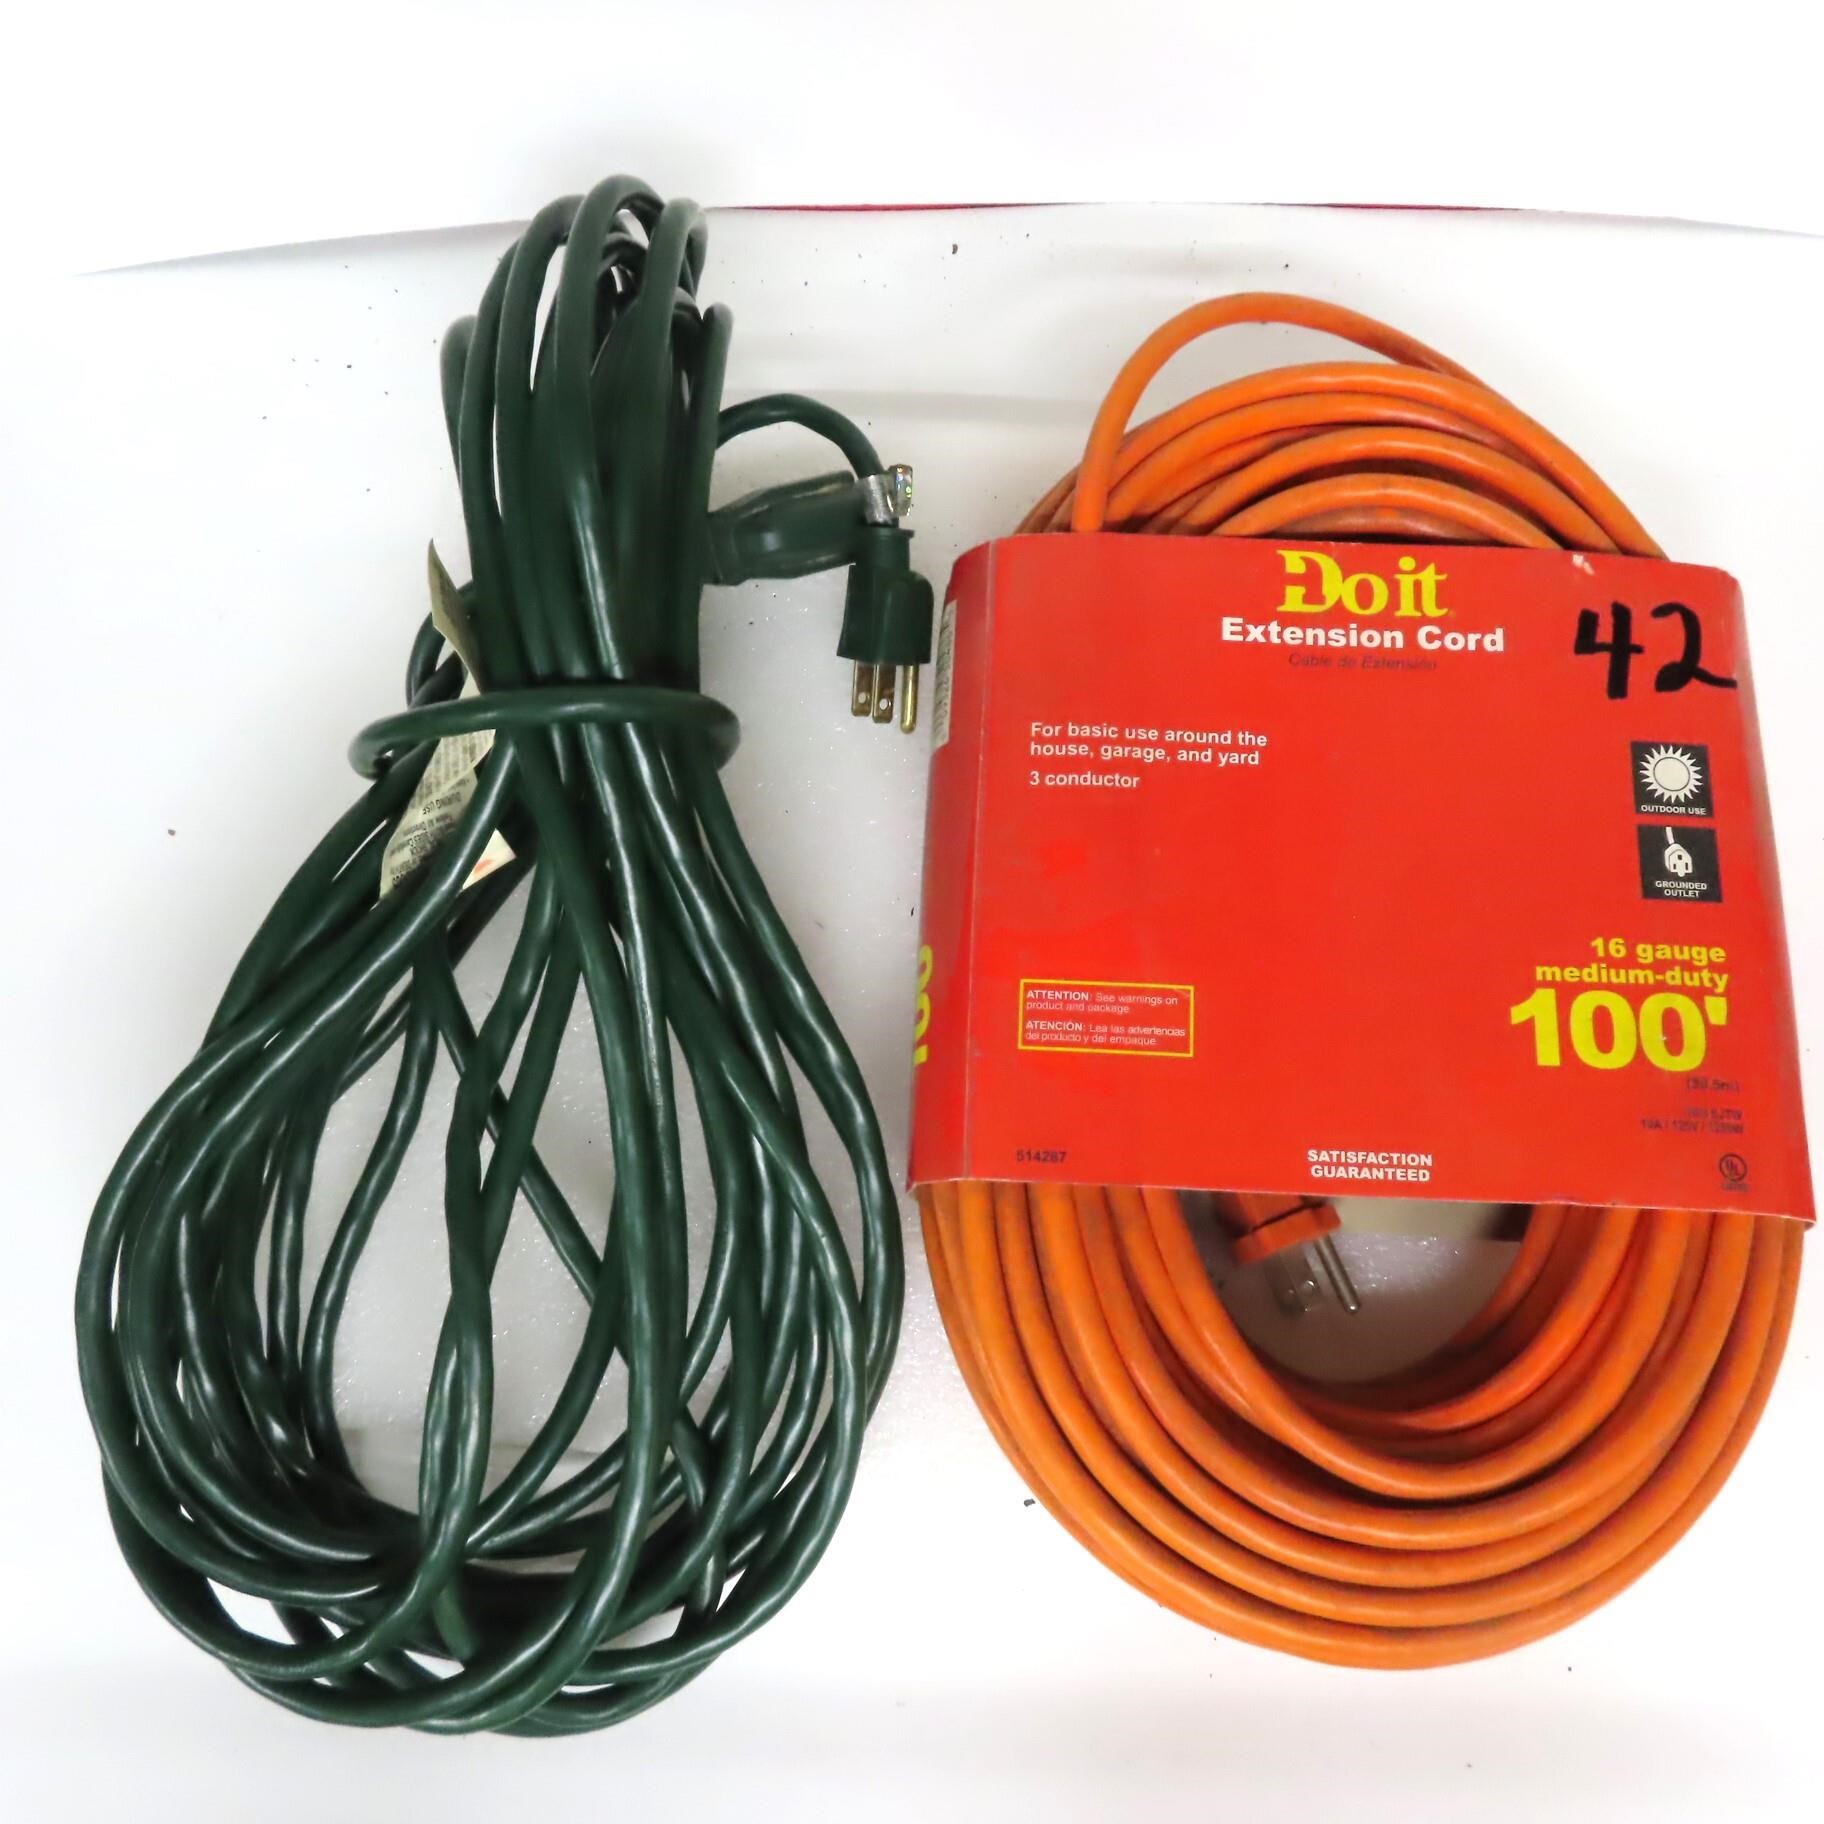 TWO (2) Extension Cords (one never out of package)